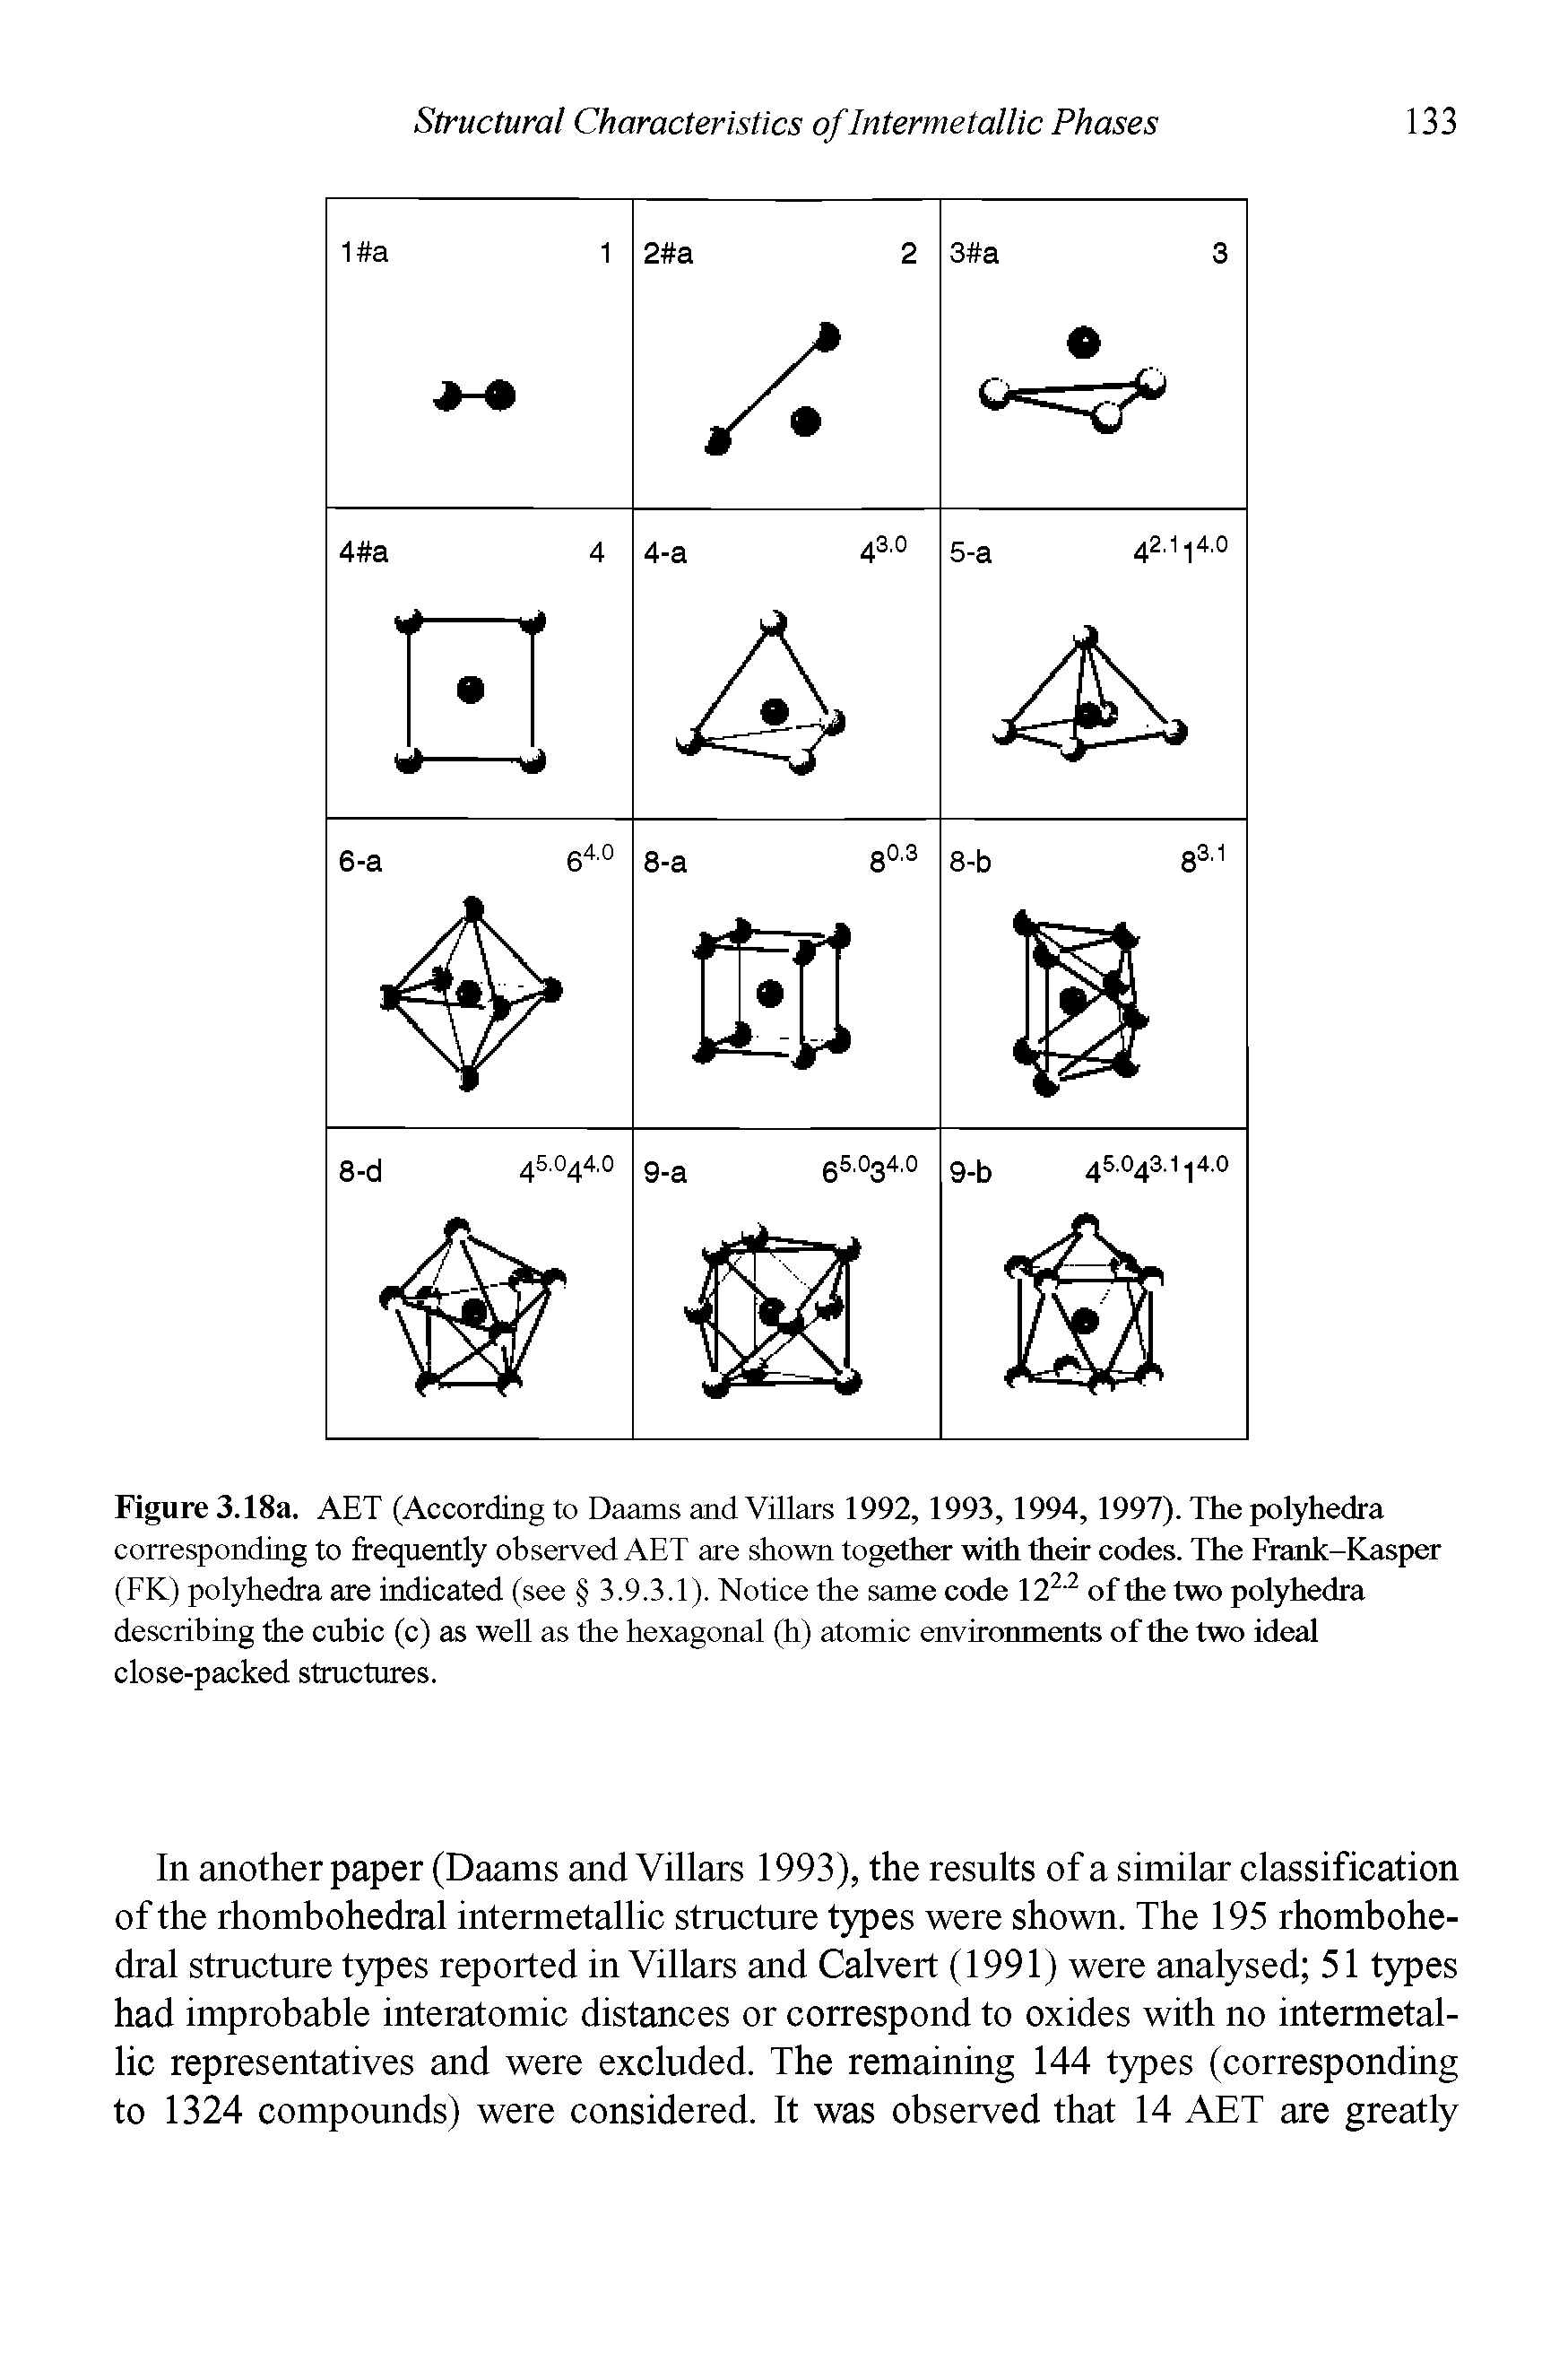 Figure 3.18a. AET (According to Daams and Villars 1992,1993,1994,1997). The polyhedra corresponding to frequently observed AET are shown together with their codes. The Frank-Kasper (FK) polyhedra are indicated (see 3.9.3.1). Notice the same code 122 2 of the two polyhedra describing the cubic (c) as well as the hexagonal (h) atomic environments of the two ideal close-packed structures.